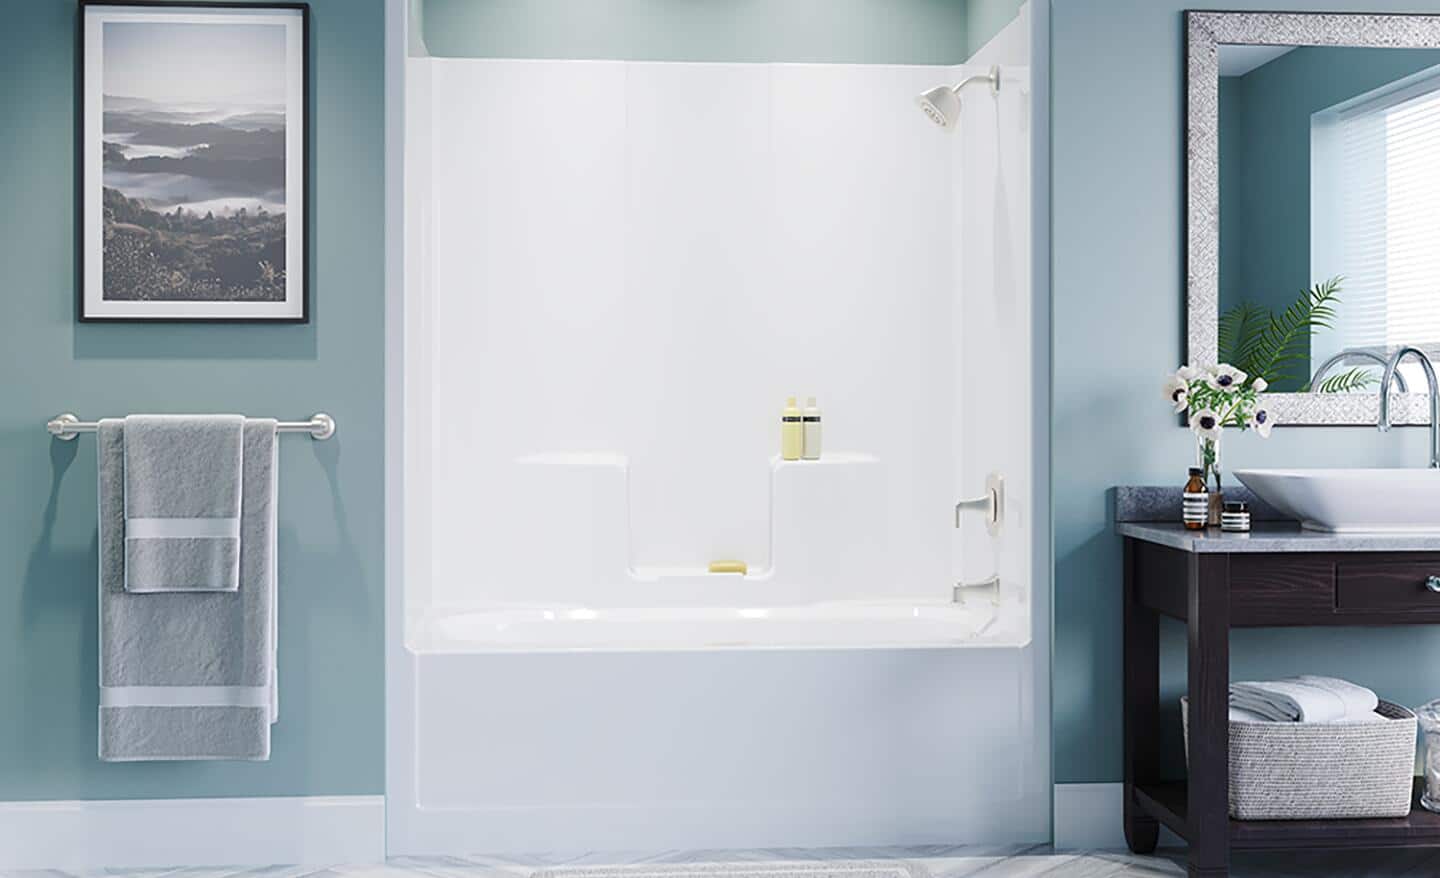  A tub and shower combination installed in a small bath.